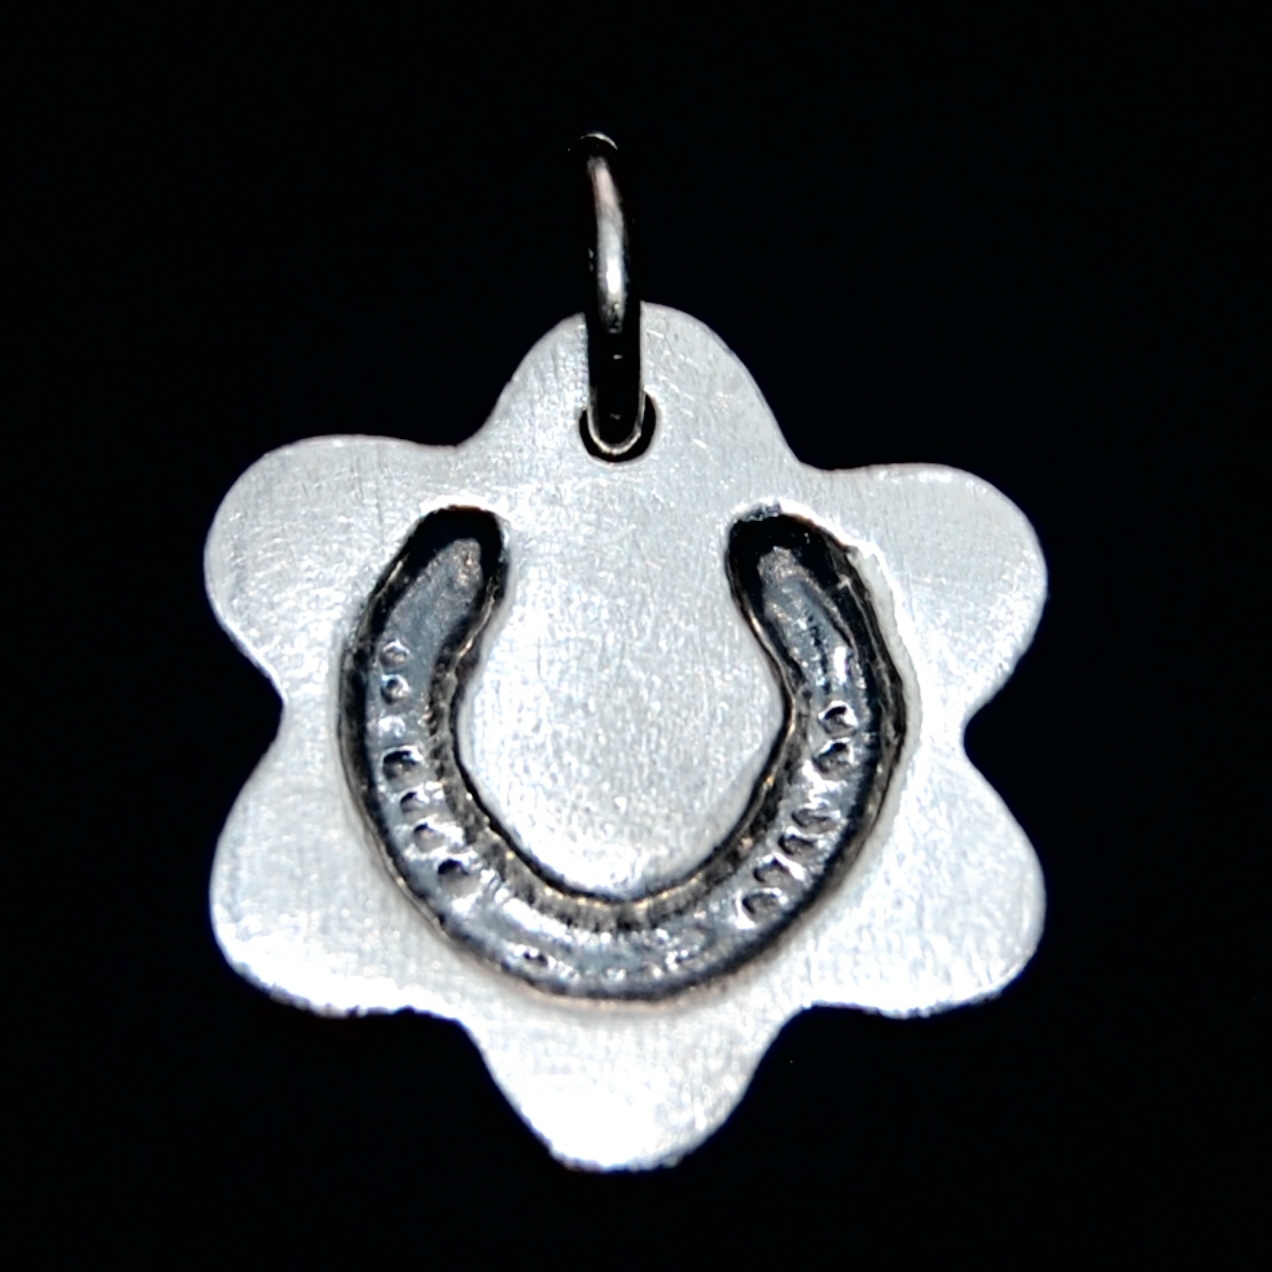 Small silver flower charm with your horse's shoe imprint.